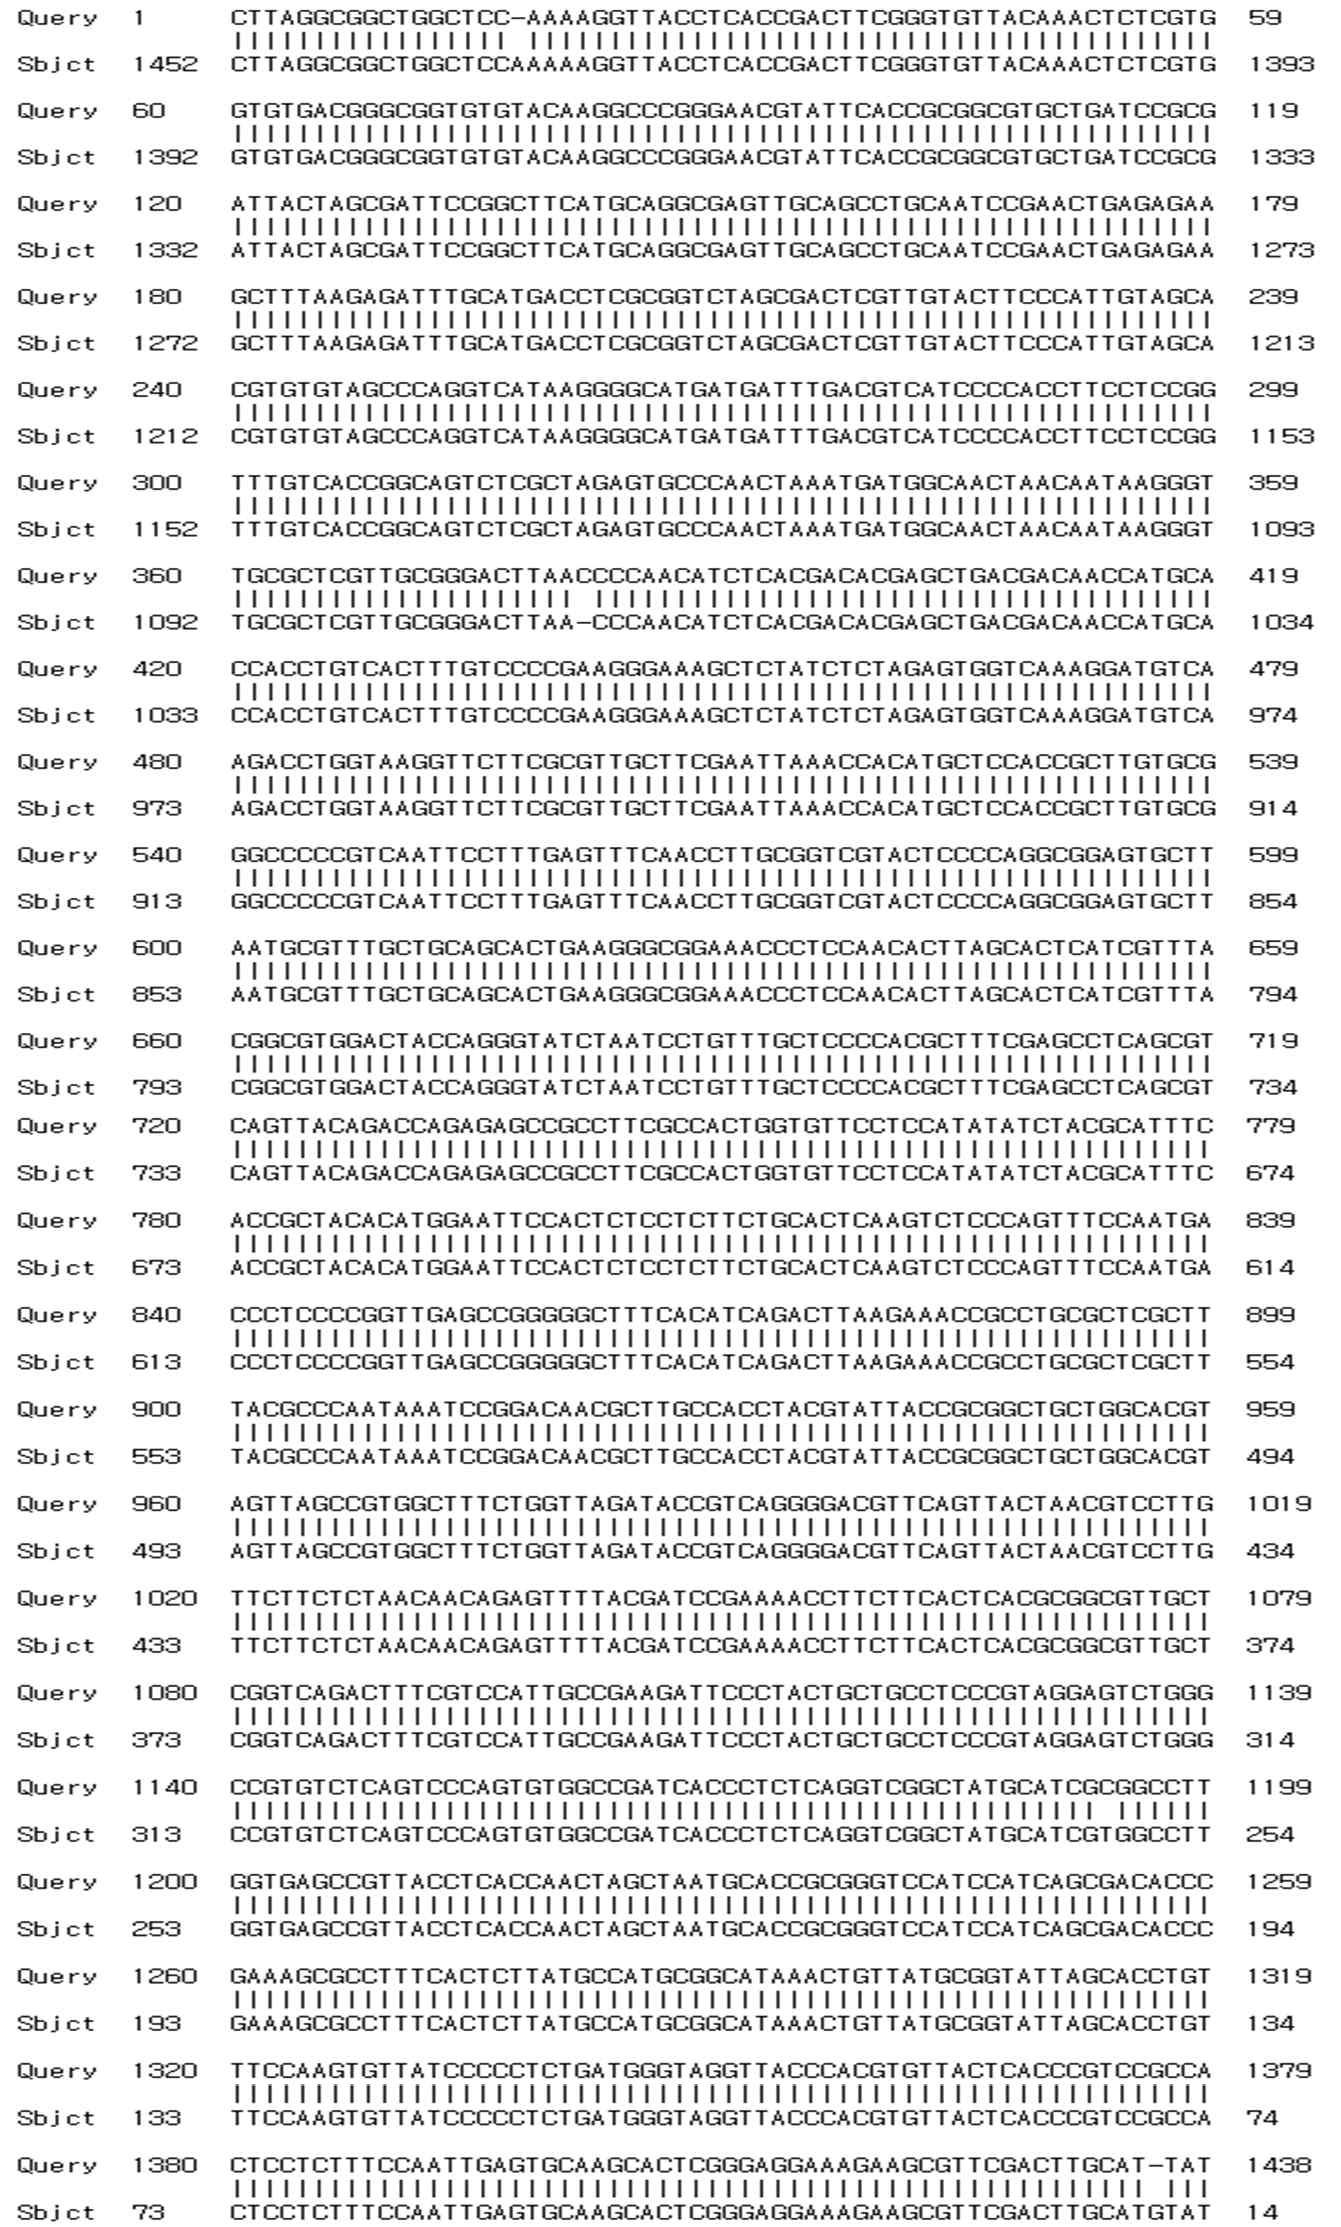 16S rRNA sequencing of E-16 strain